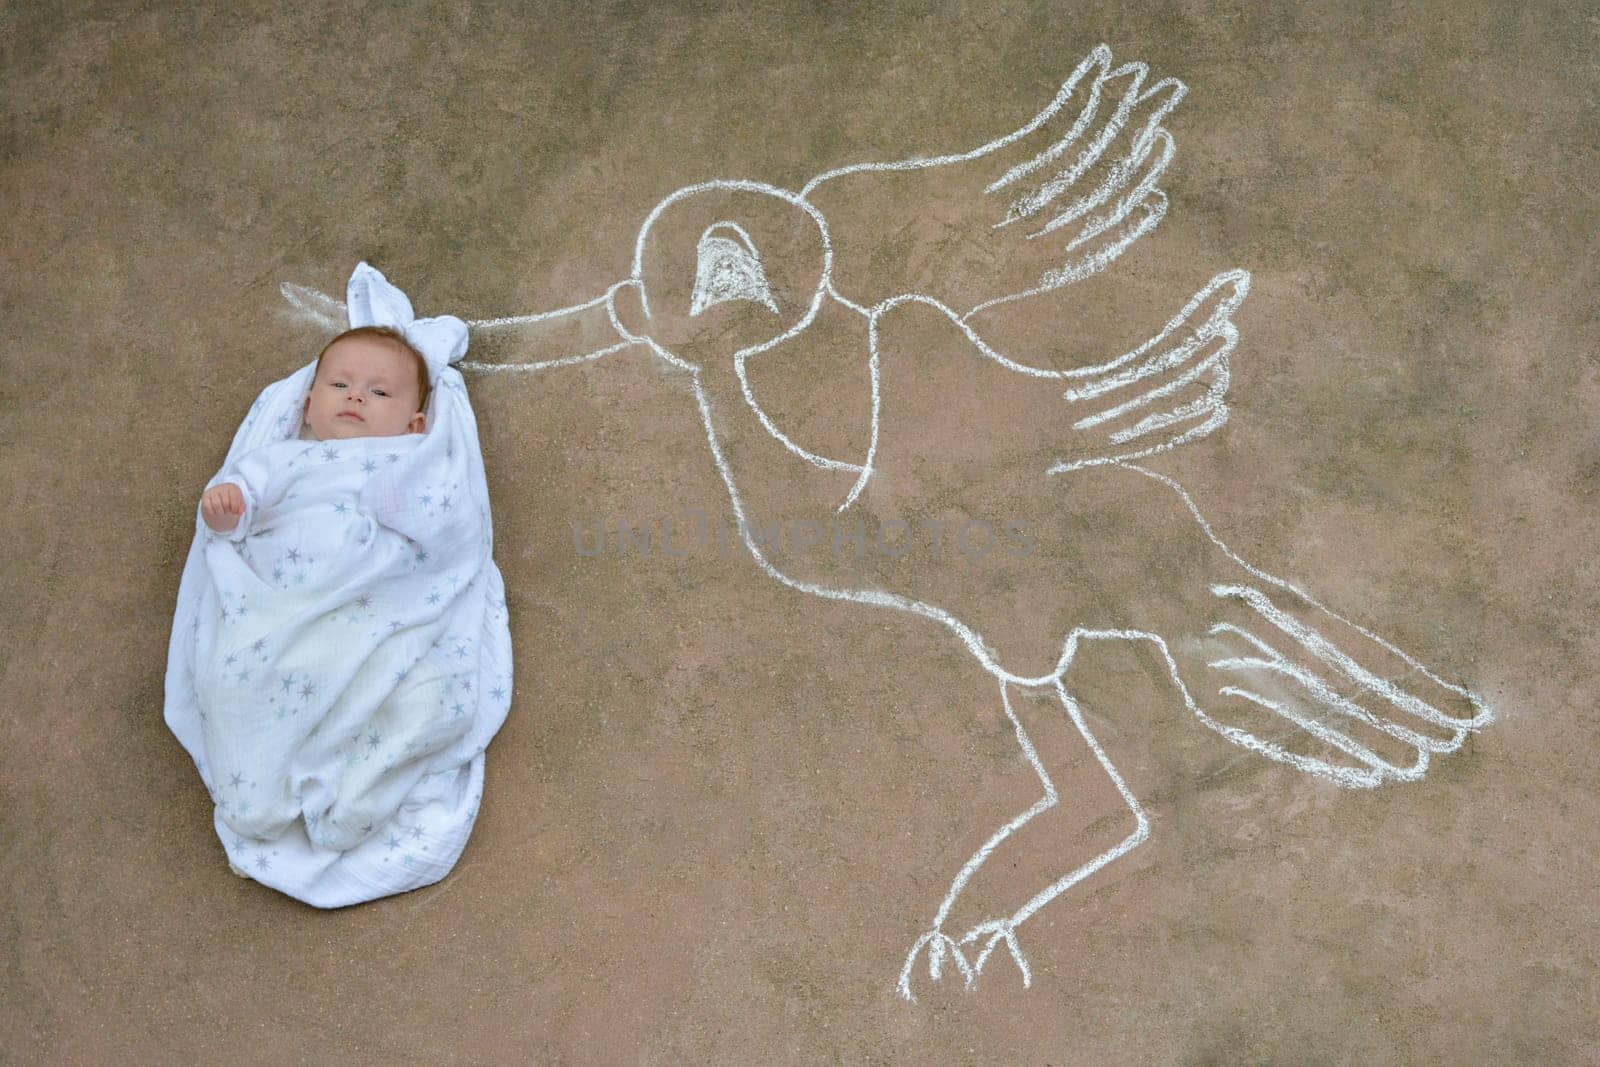 A stork holding a newborn baby in a white blanket